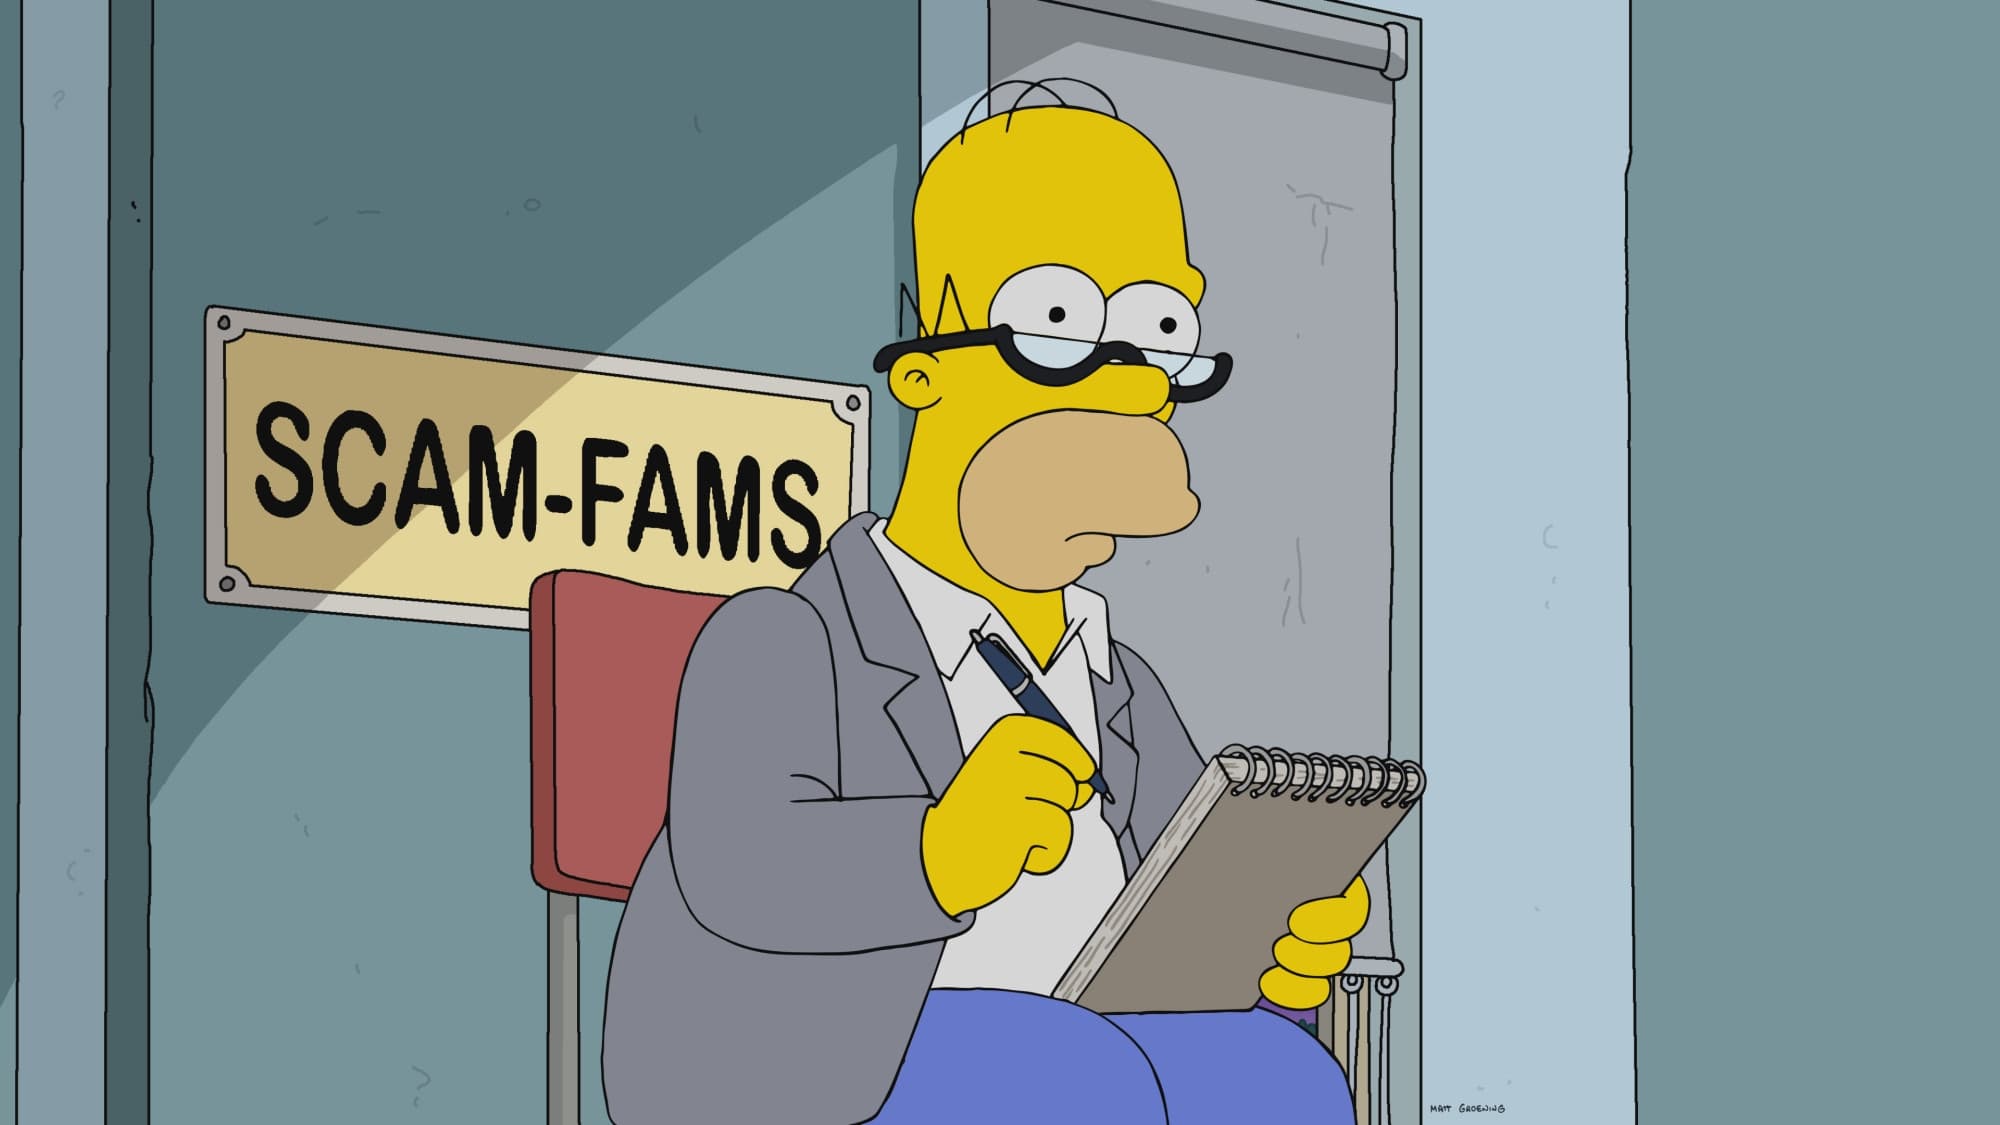 Scam-Fams is written on door and Bart is sitting on chair in front of that door.